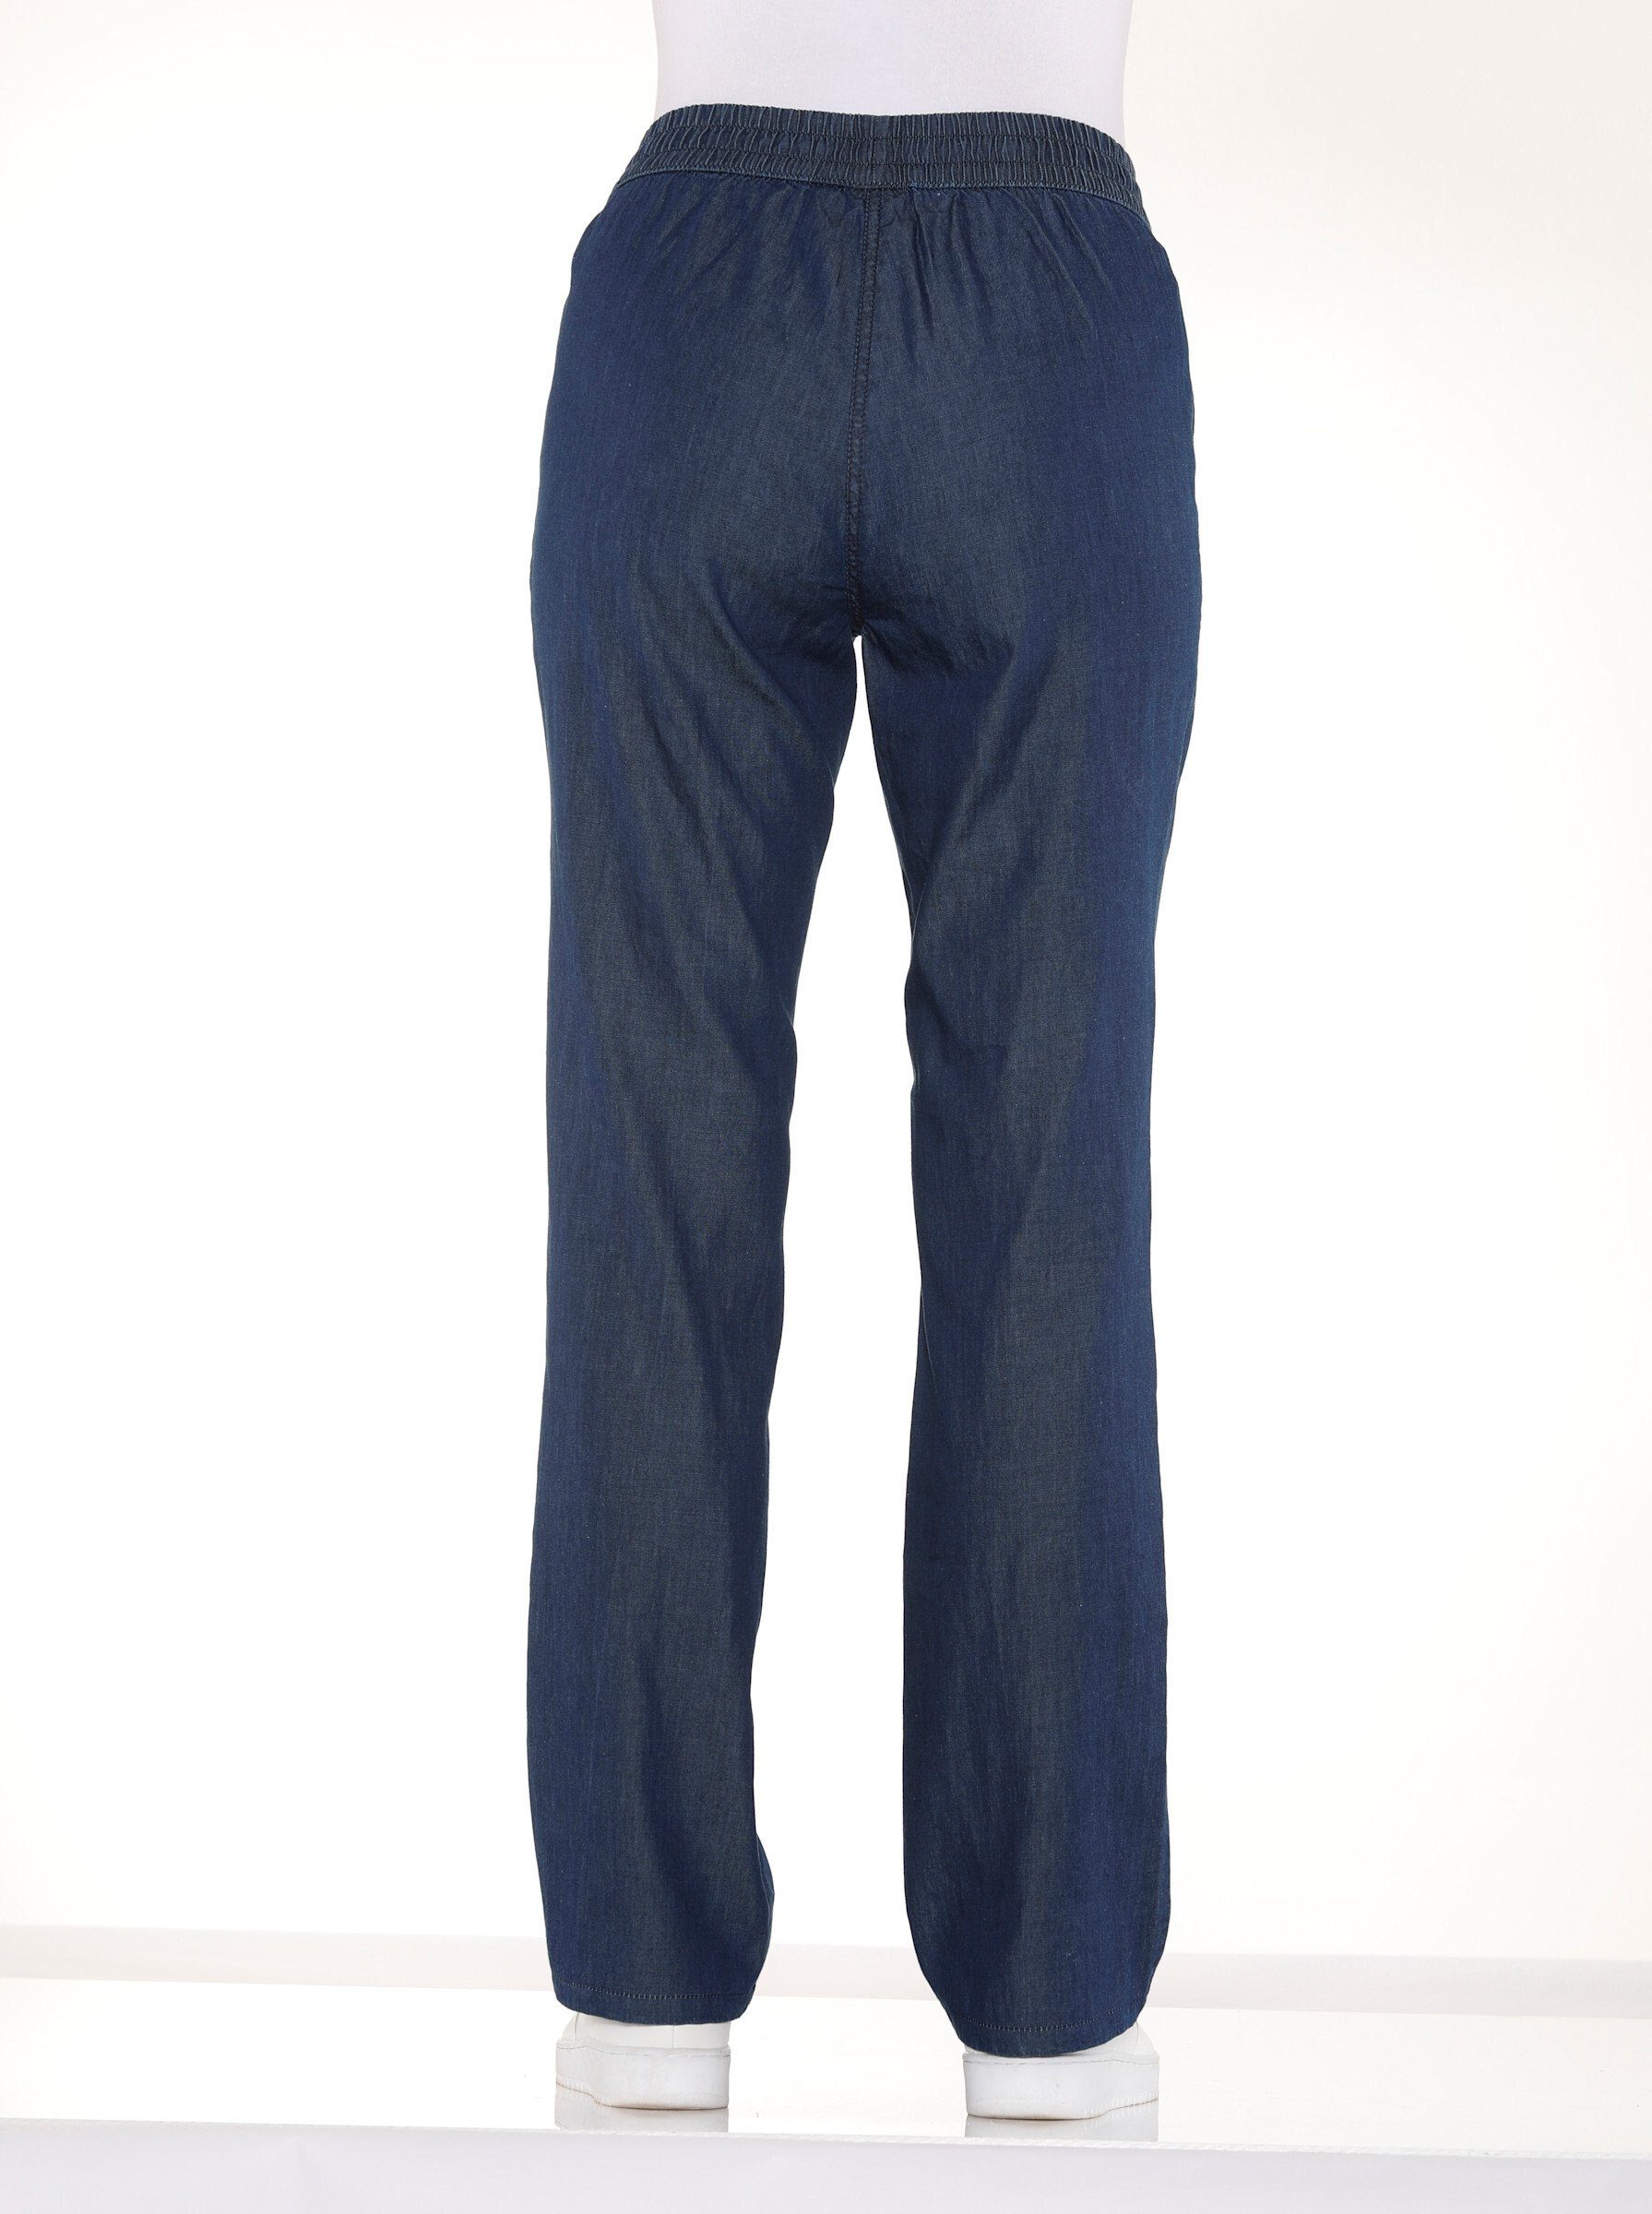 blue-stone-washed an! Jeans Bequeme Sieh